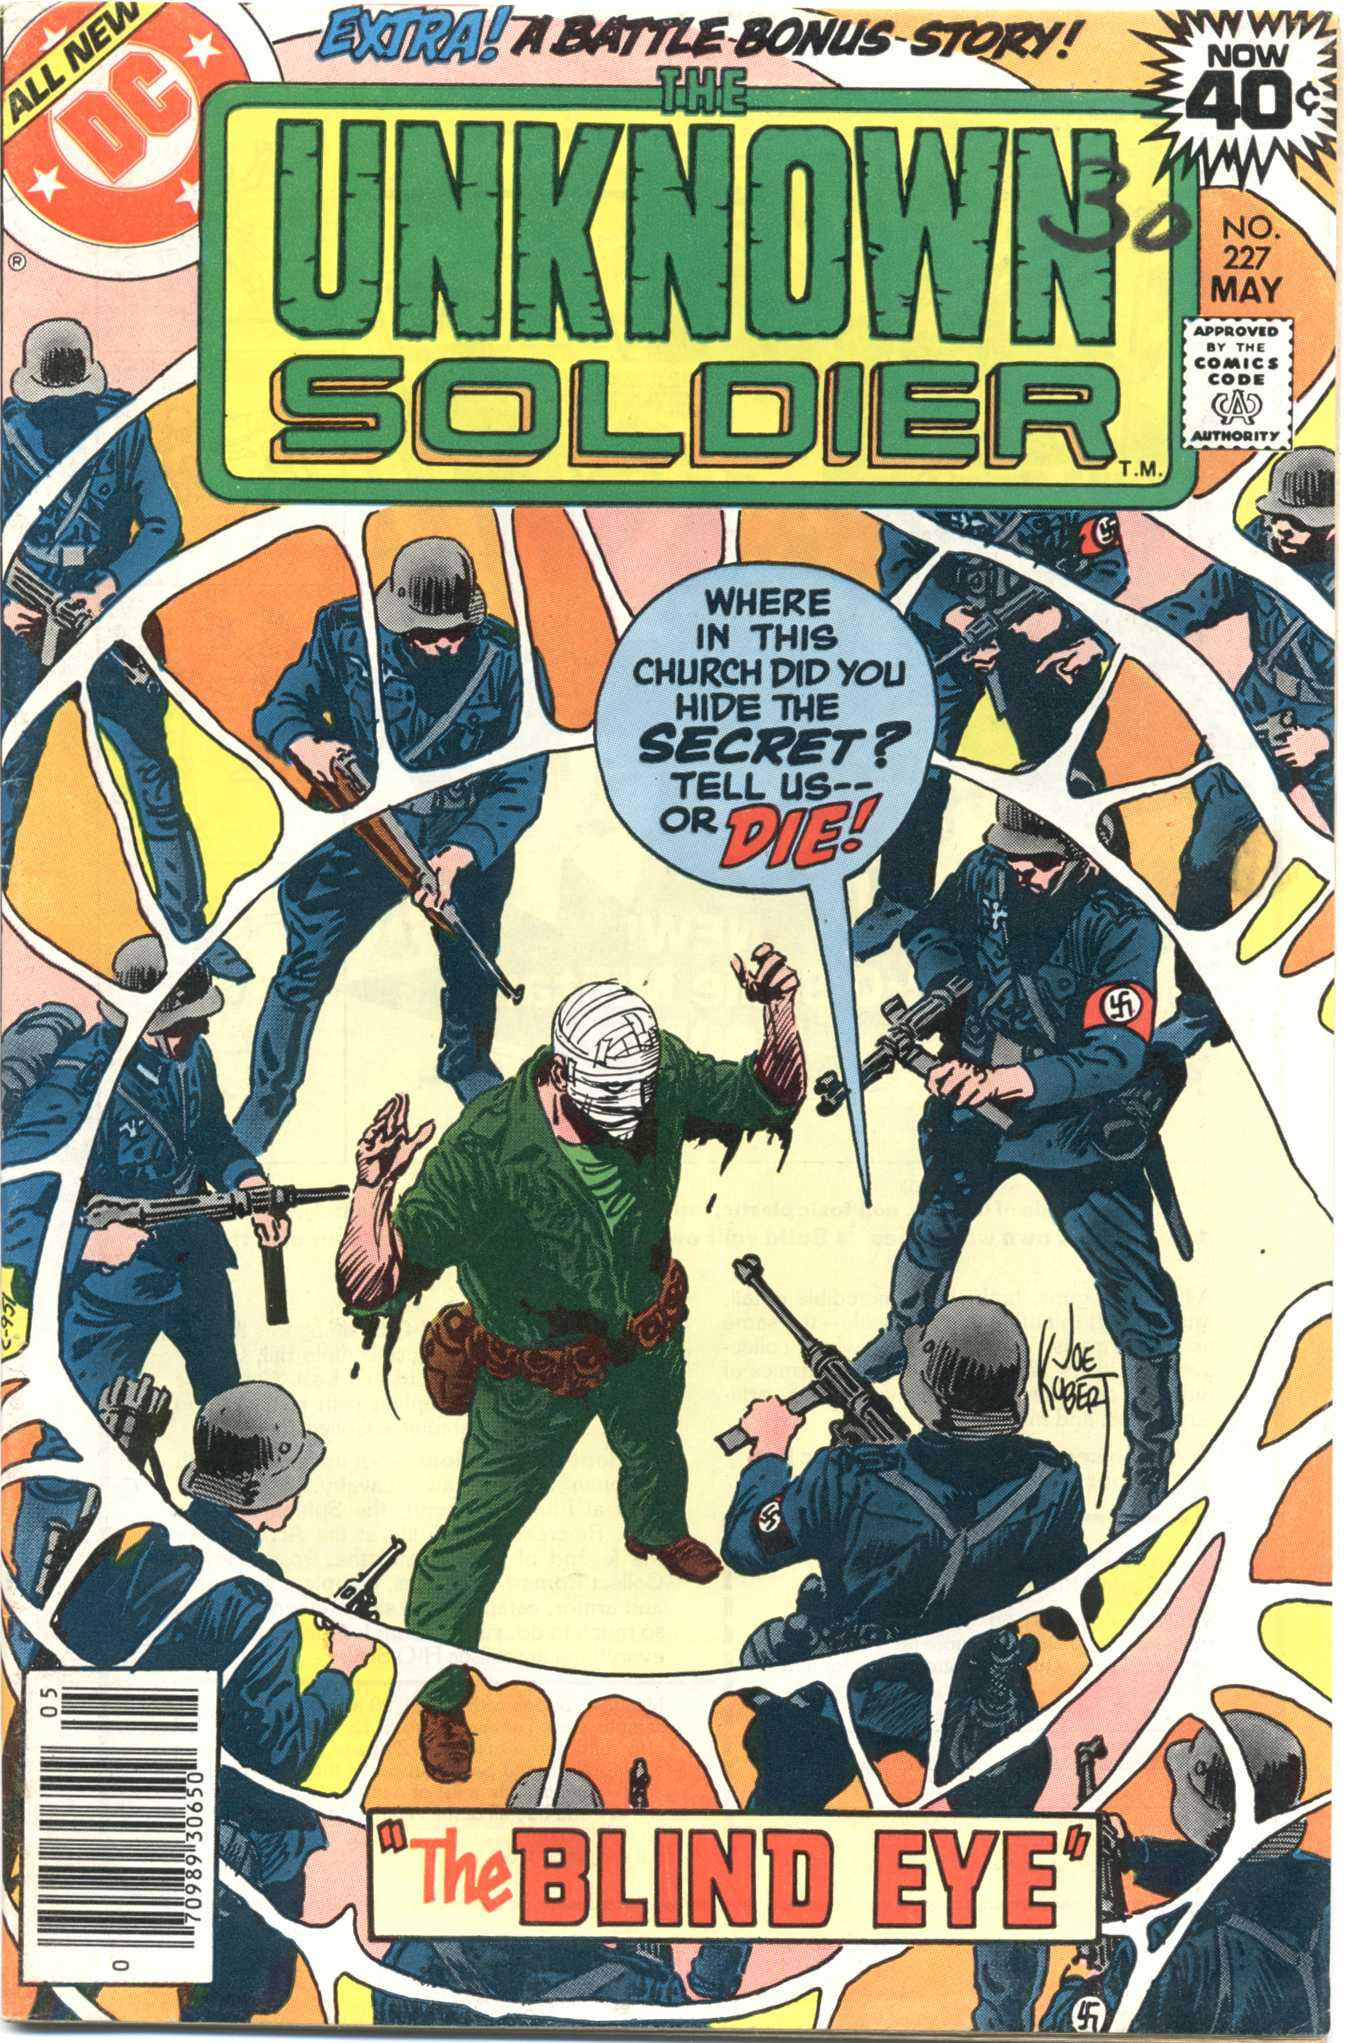 Read online Unknown Soldier (1977) comic -  Issue #227 - 1